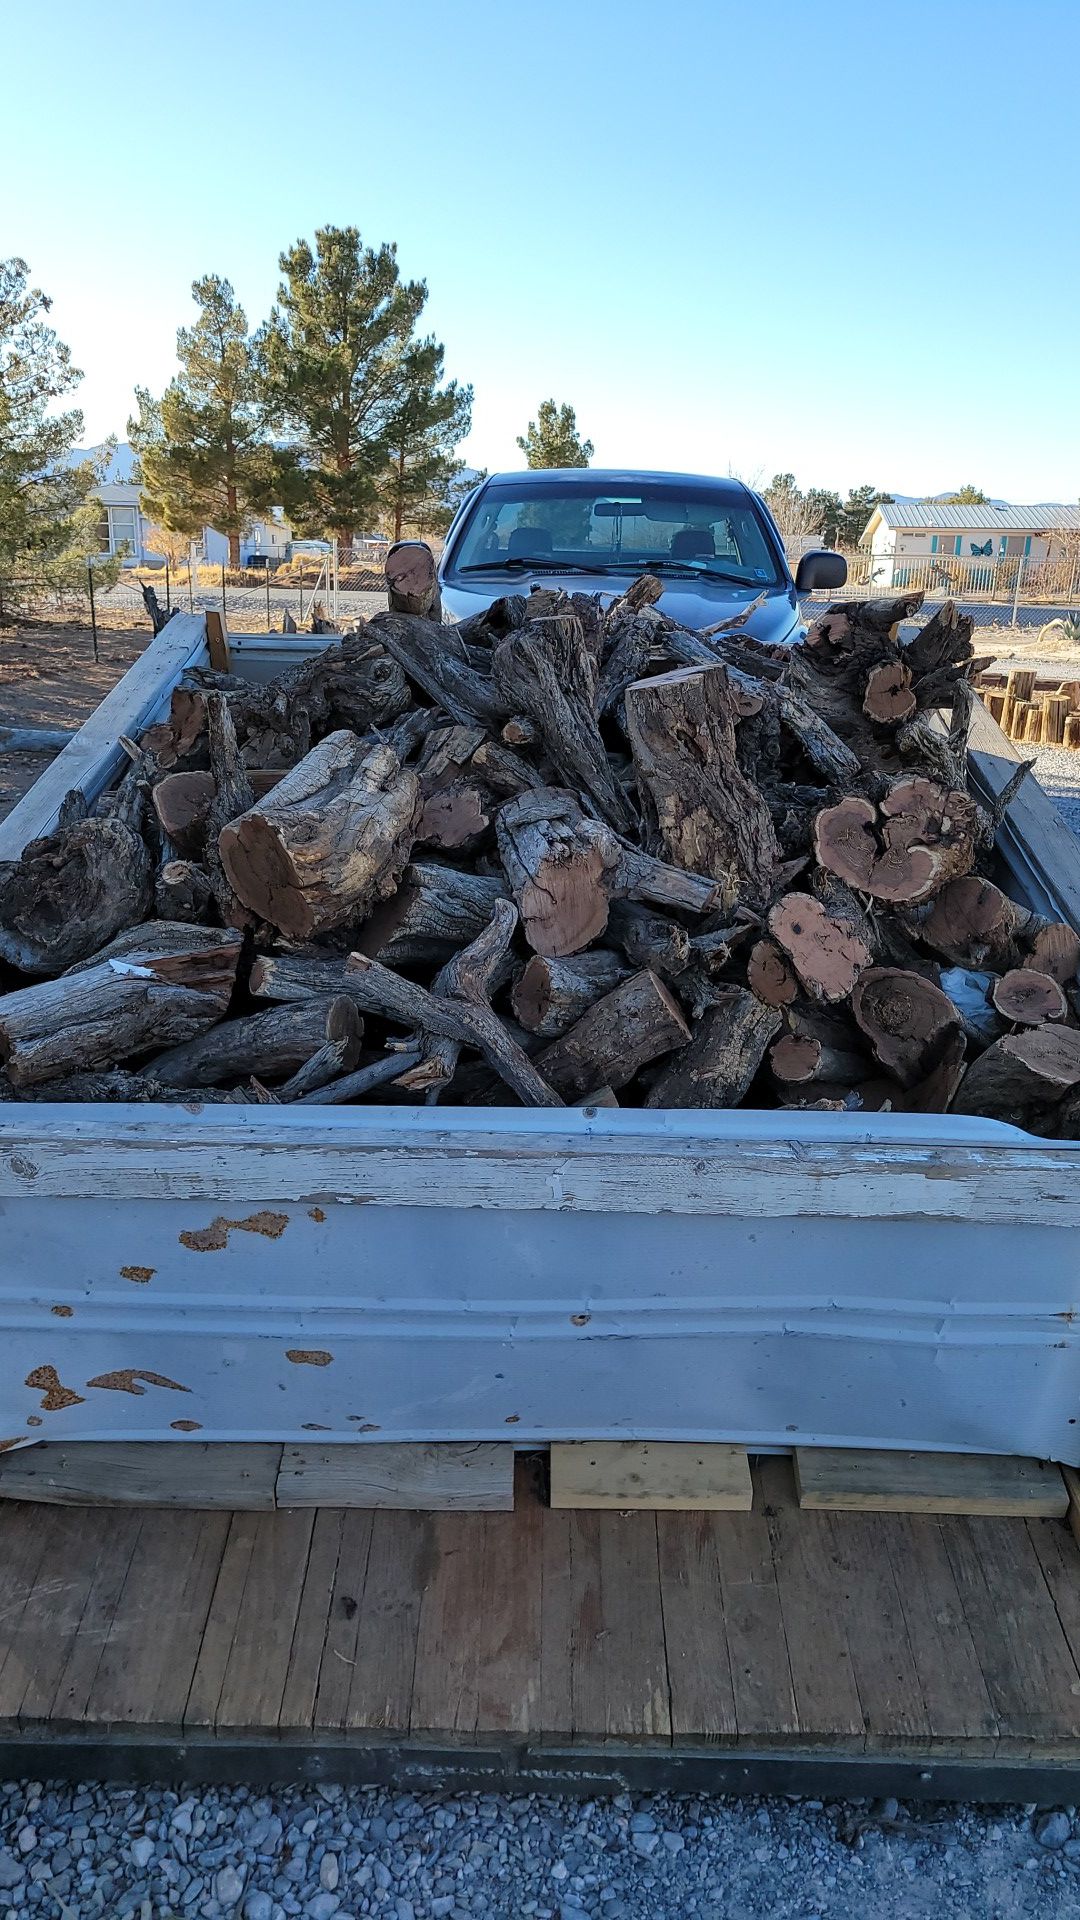 Fire wood "MUST SELL"" Mesquite" $180 Full Cord4×4×8